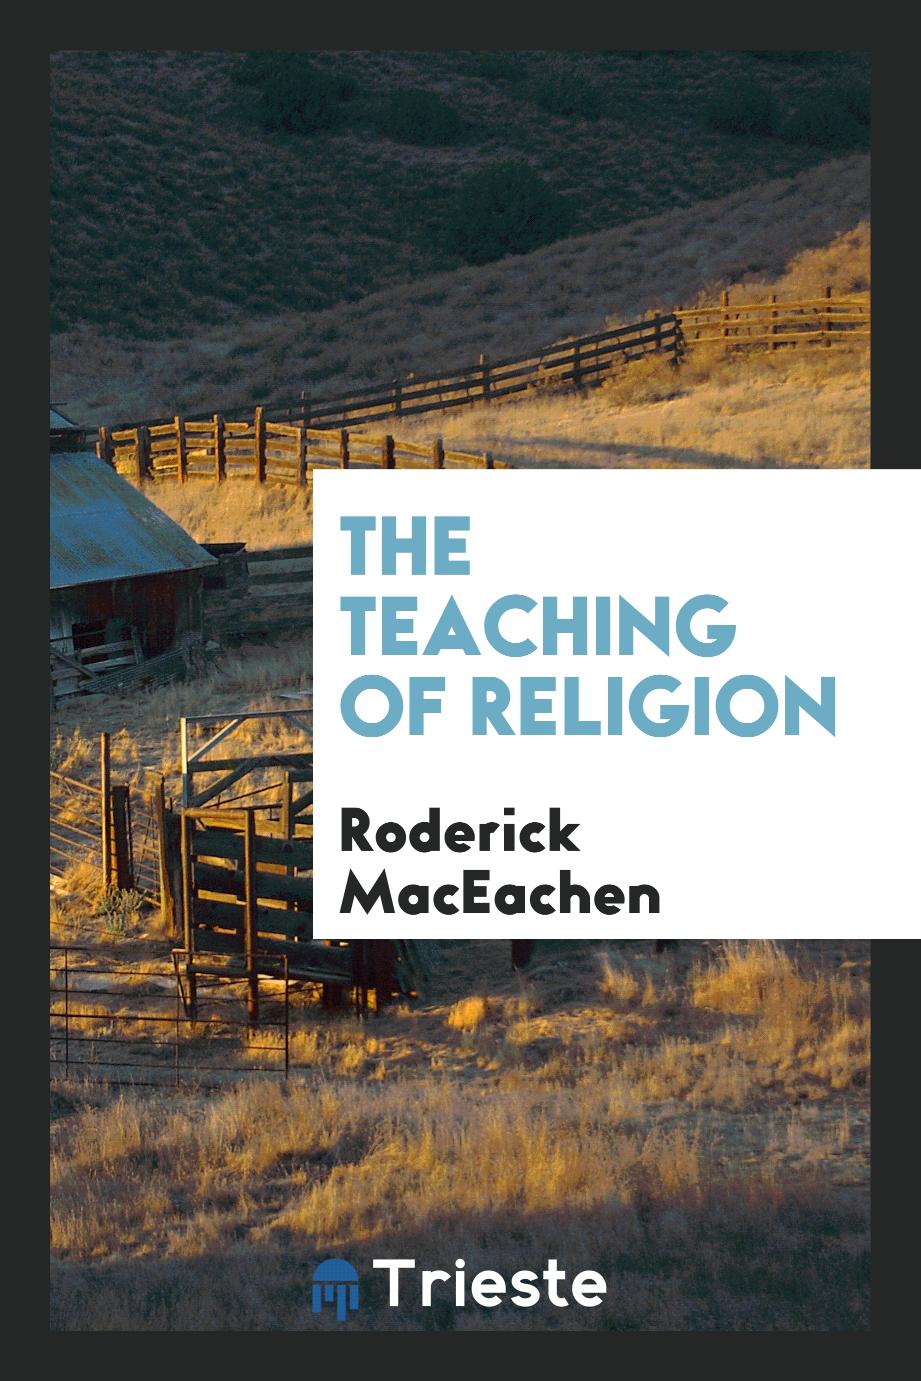 The teaching of religion